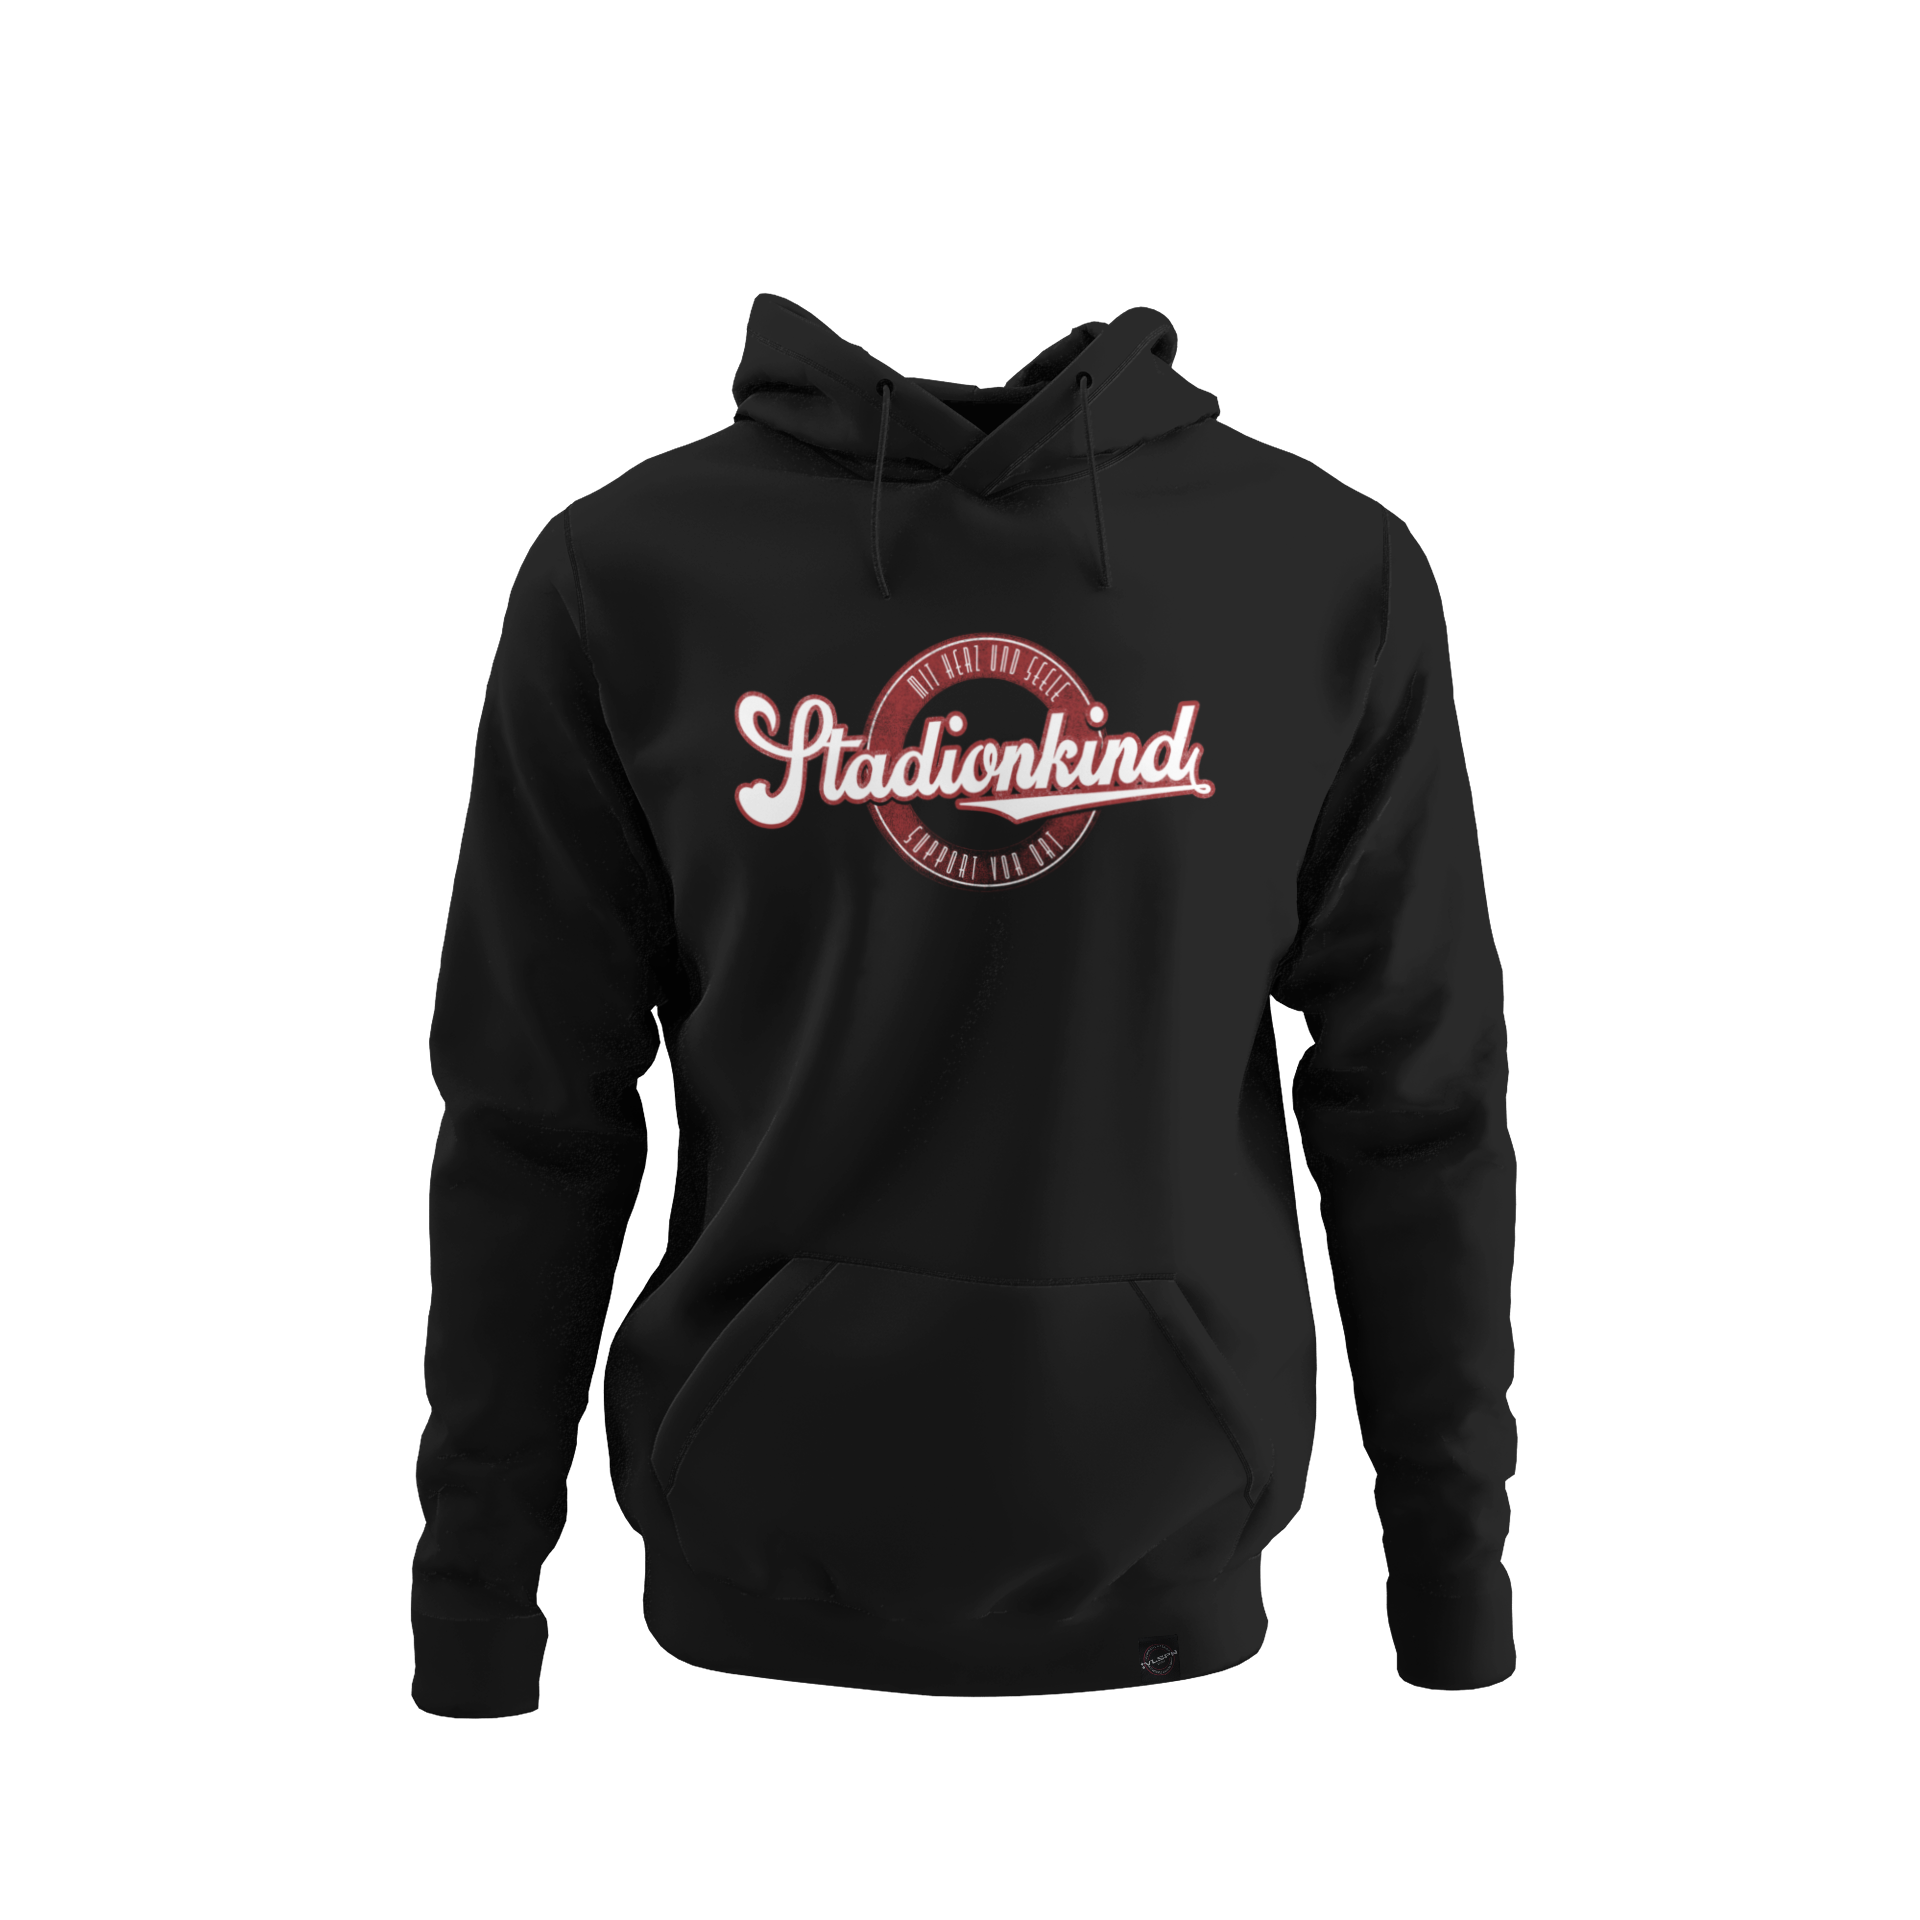 mockup-of-a-ghosted-pullover-hoodie-with-a-colored-background-4439-el1 (99).png